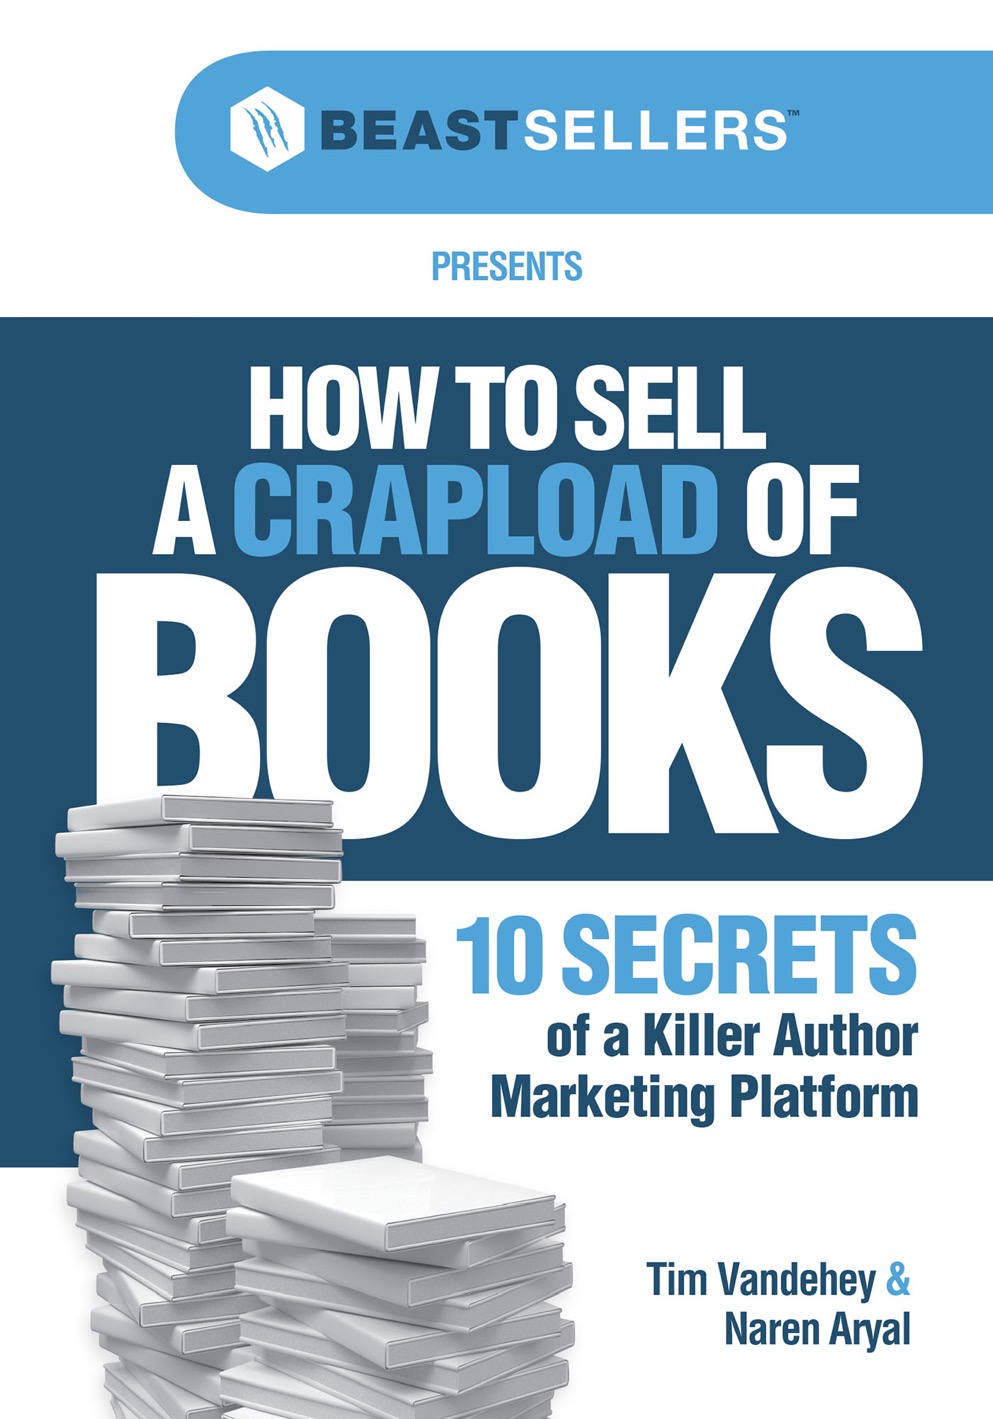 This image is the cover for the book How to Sell a Crapload of Books